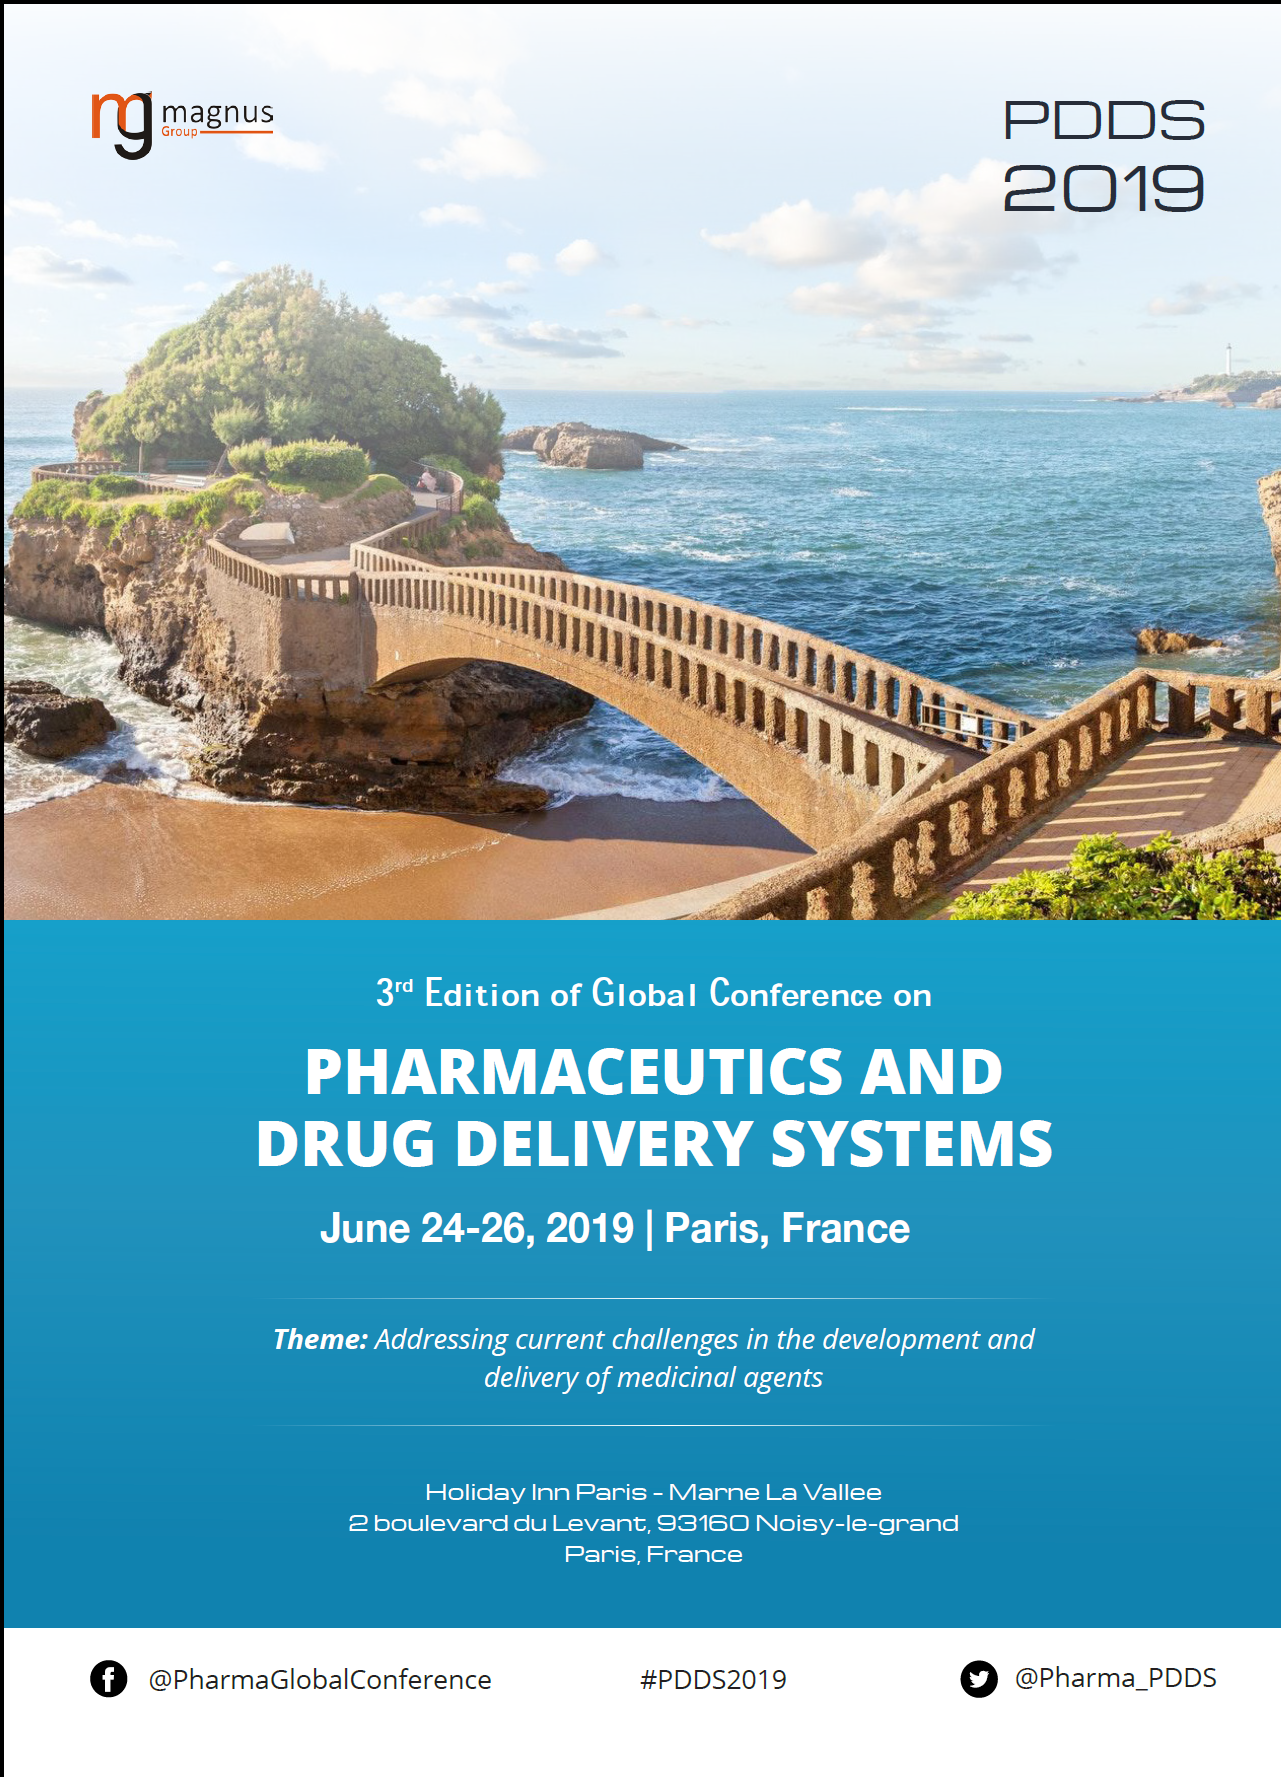 3rd Edition of Global conference on Pharmaceutics and Drug Delivery Systems | Paris, France Program